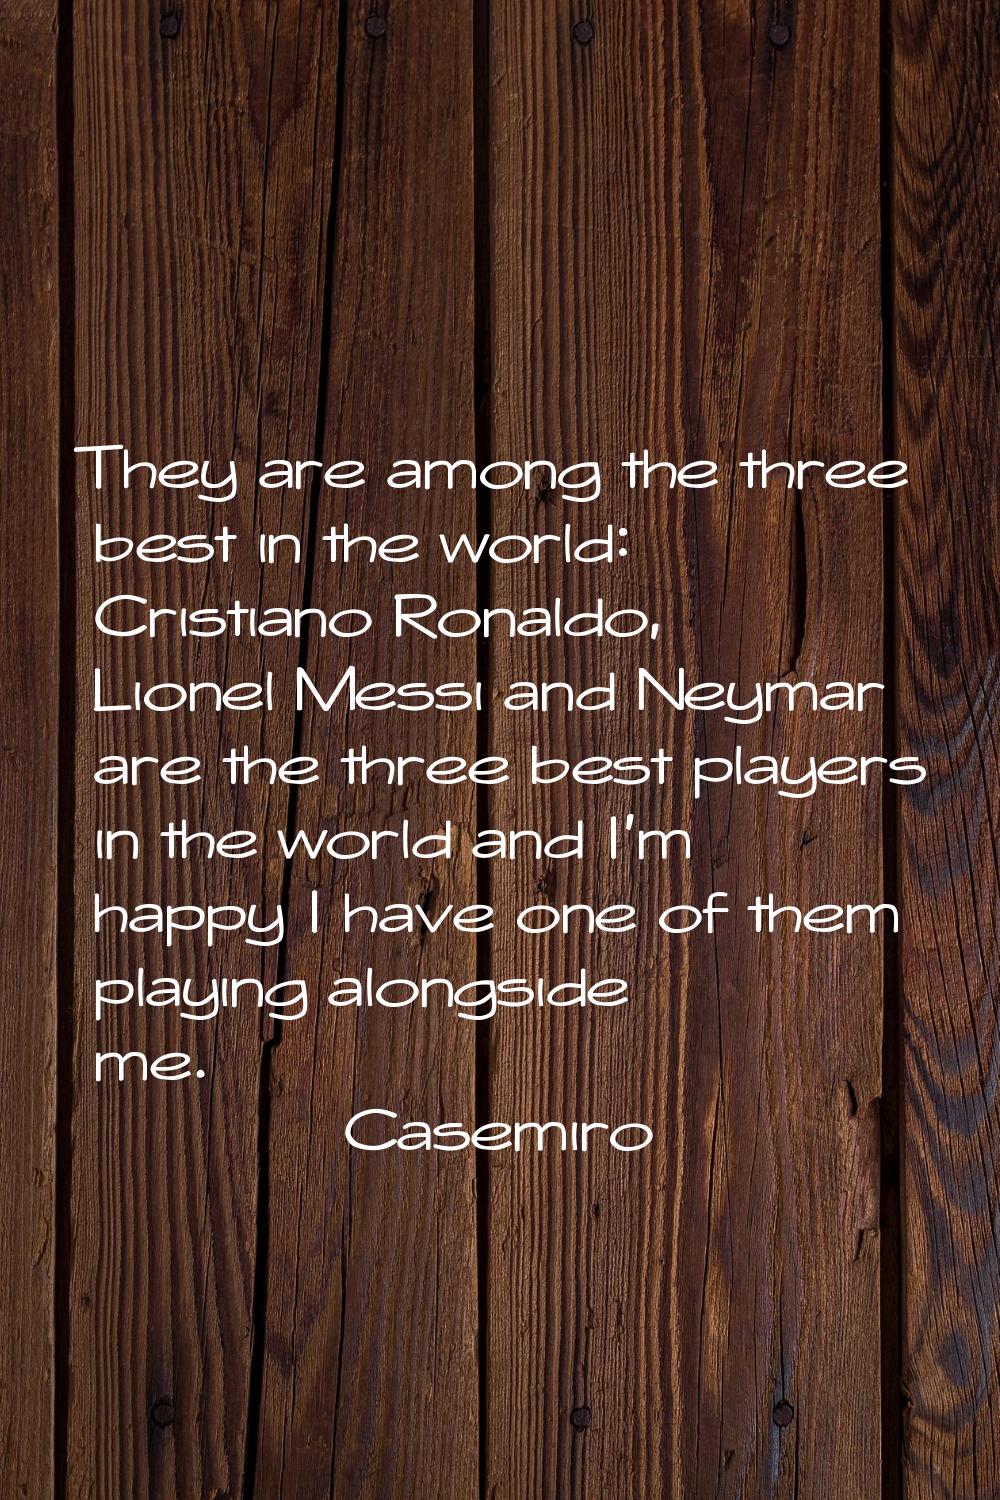 They are among the three best in the world: Cristiano Ronaldo, Lionel Messi and Neymar are the thre